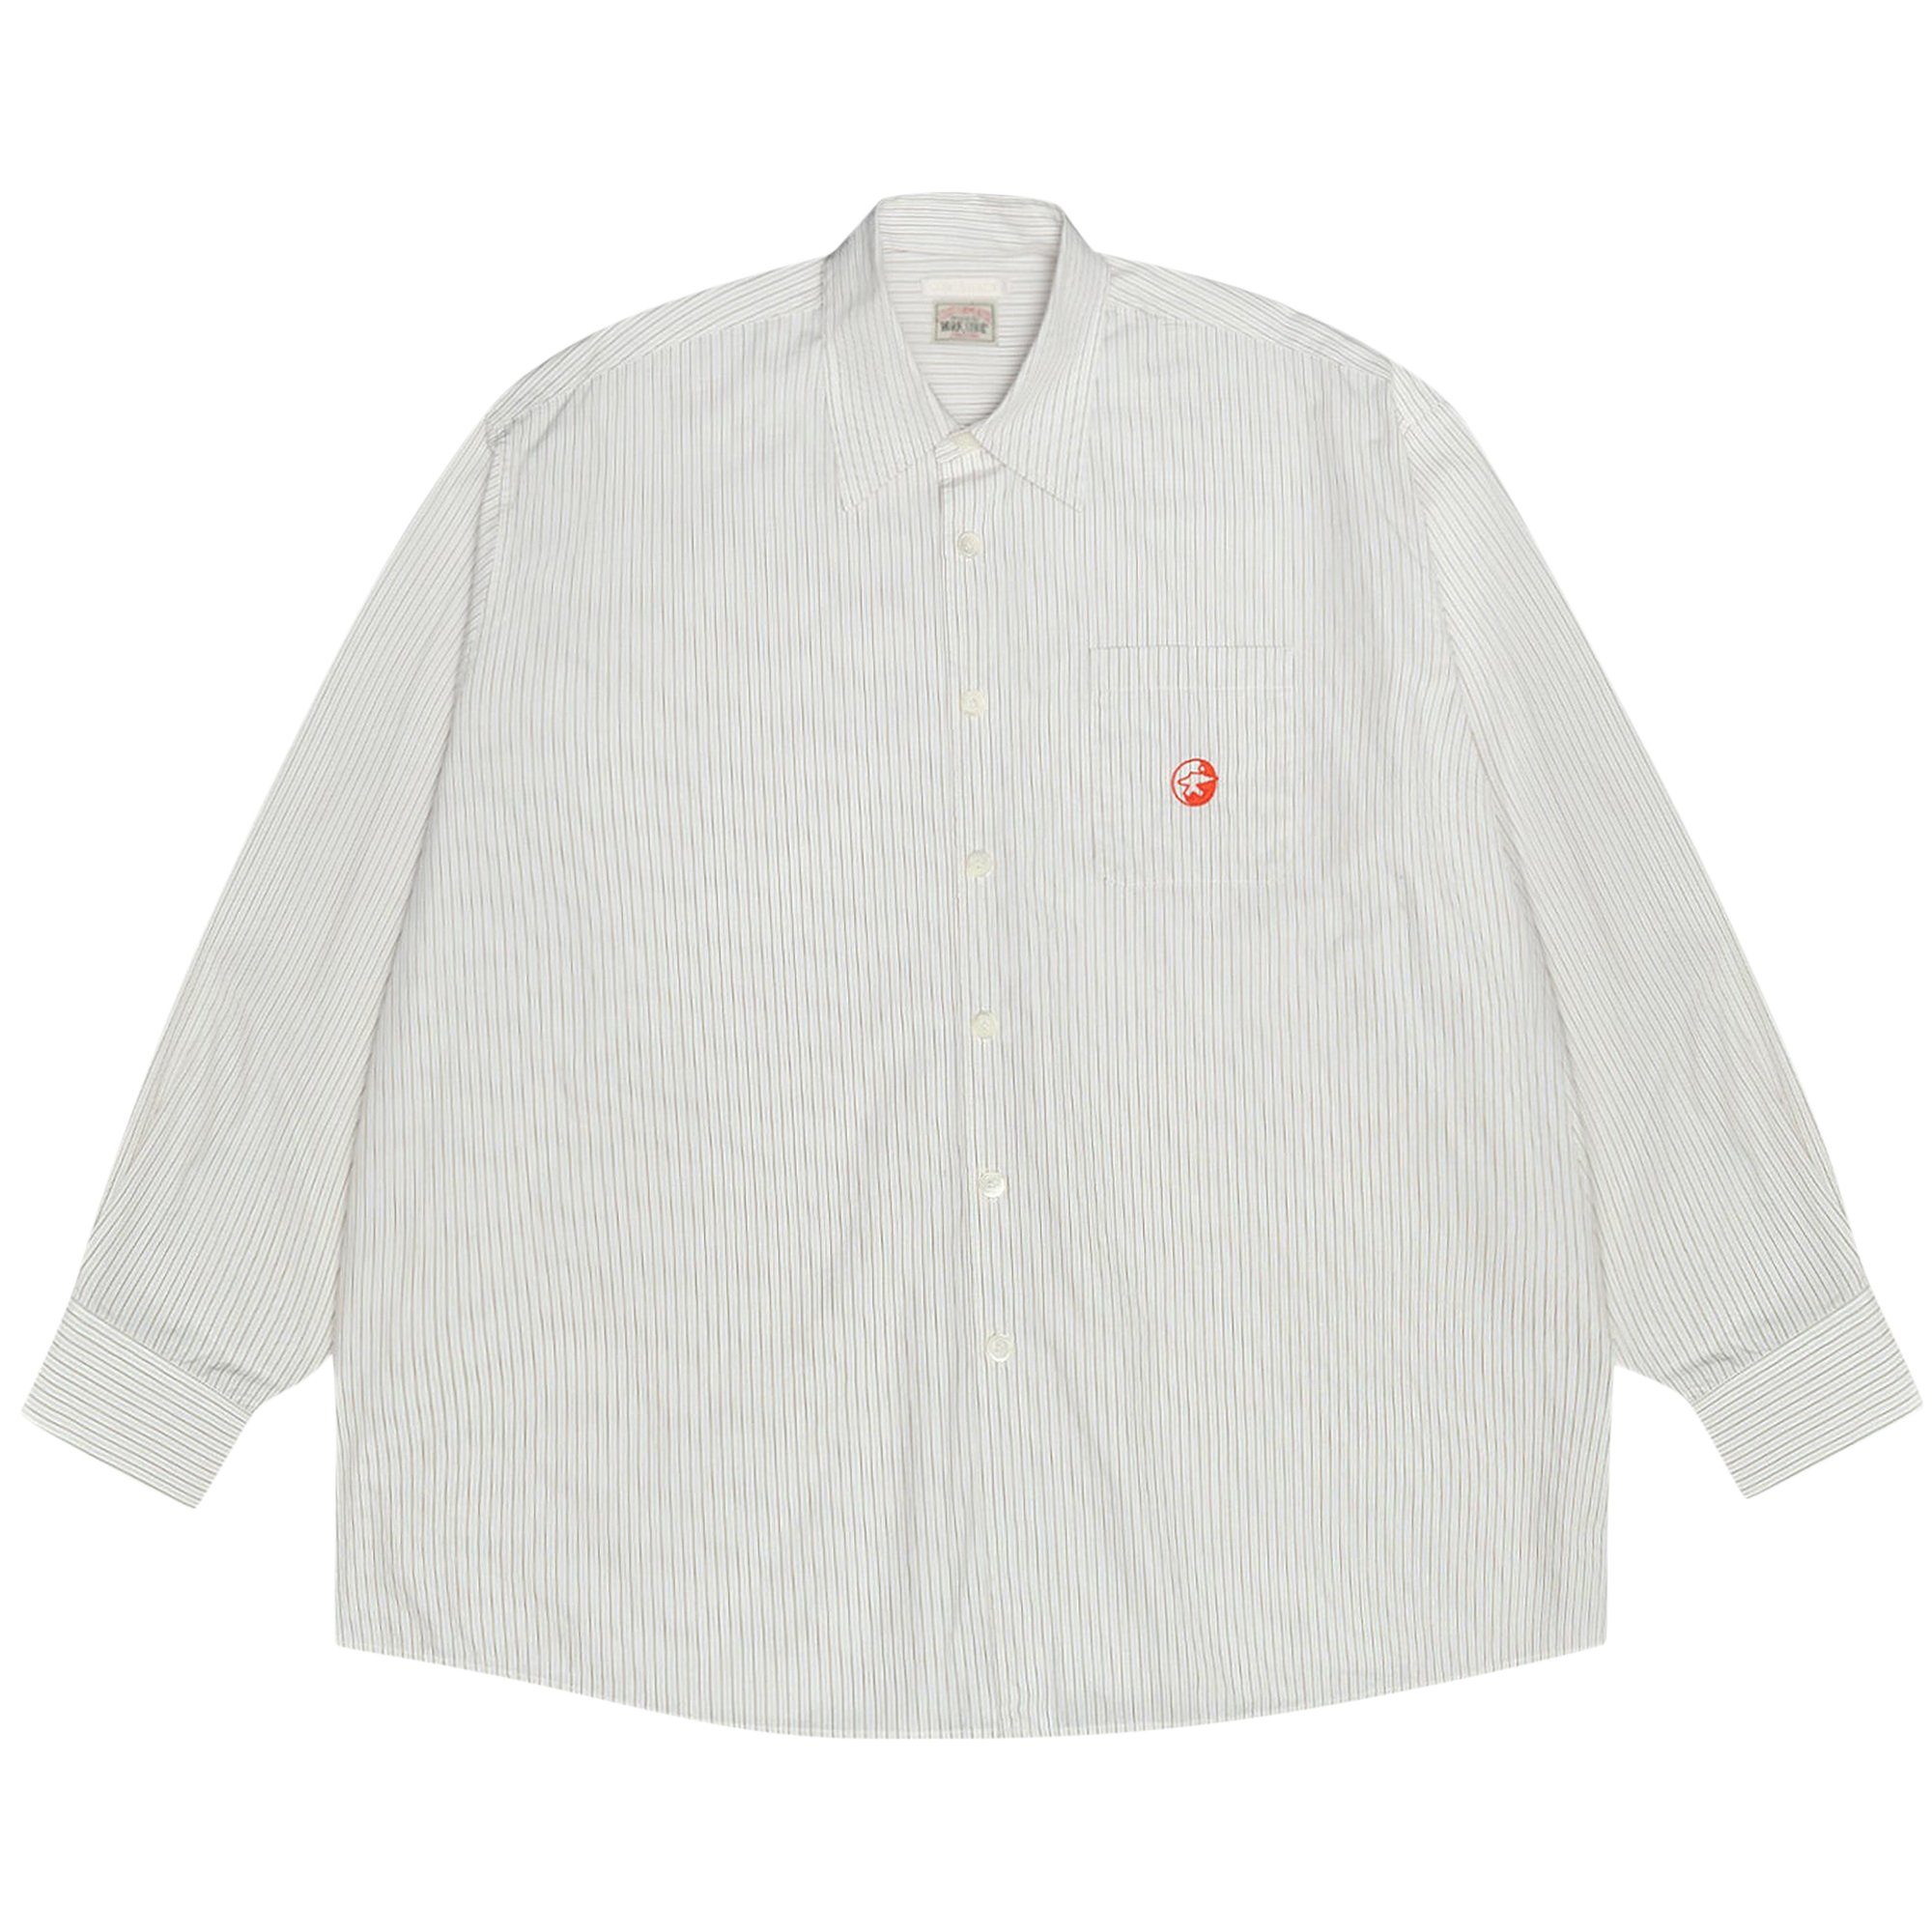 Buy Stussy x Our Legacy Work Shop Borrowed Shirt 'White Business